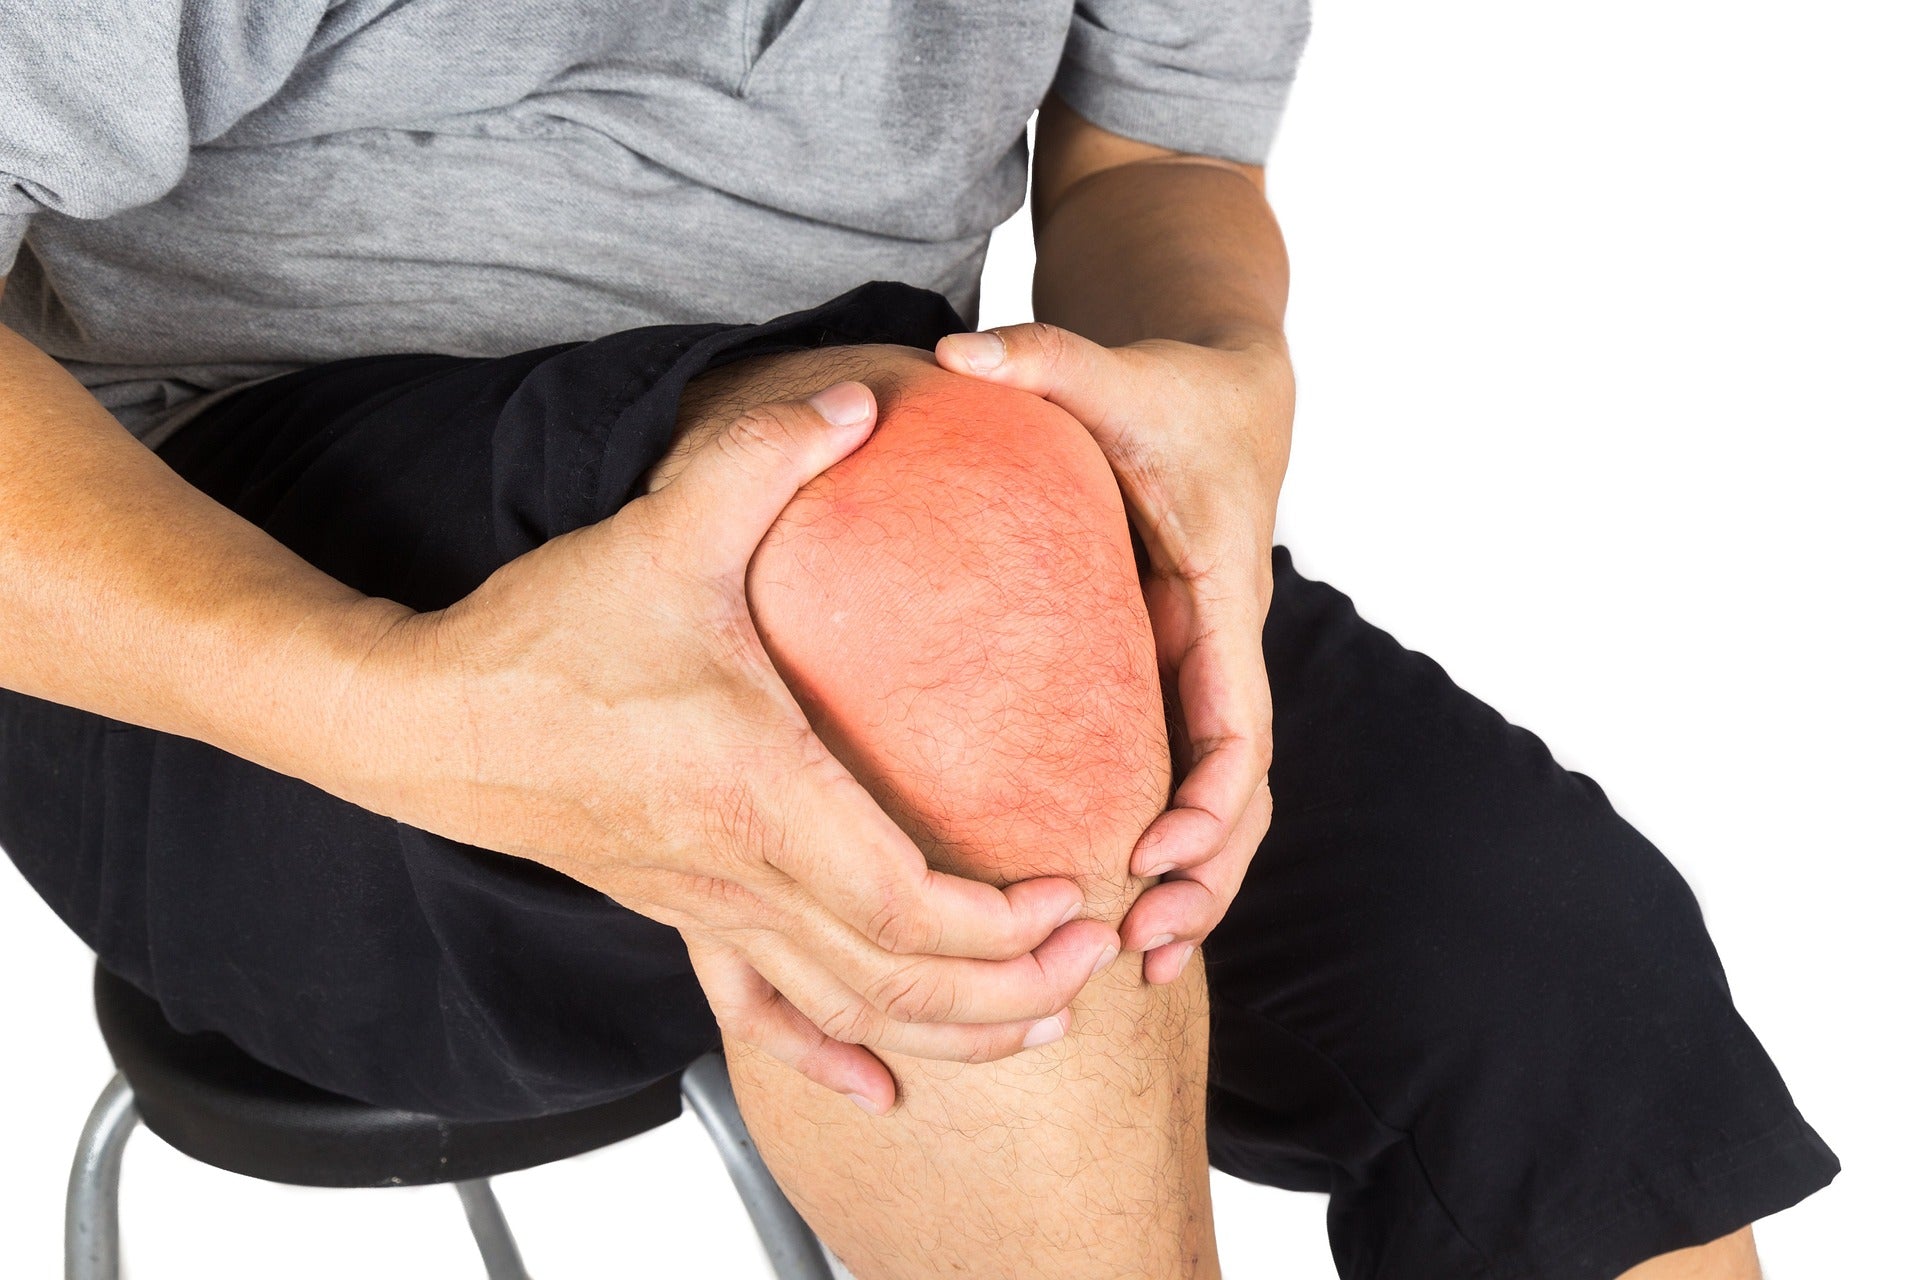 An image of a knee wioth redness signifying knee pain.